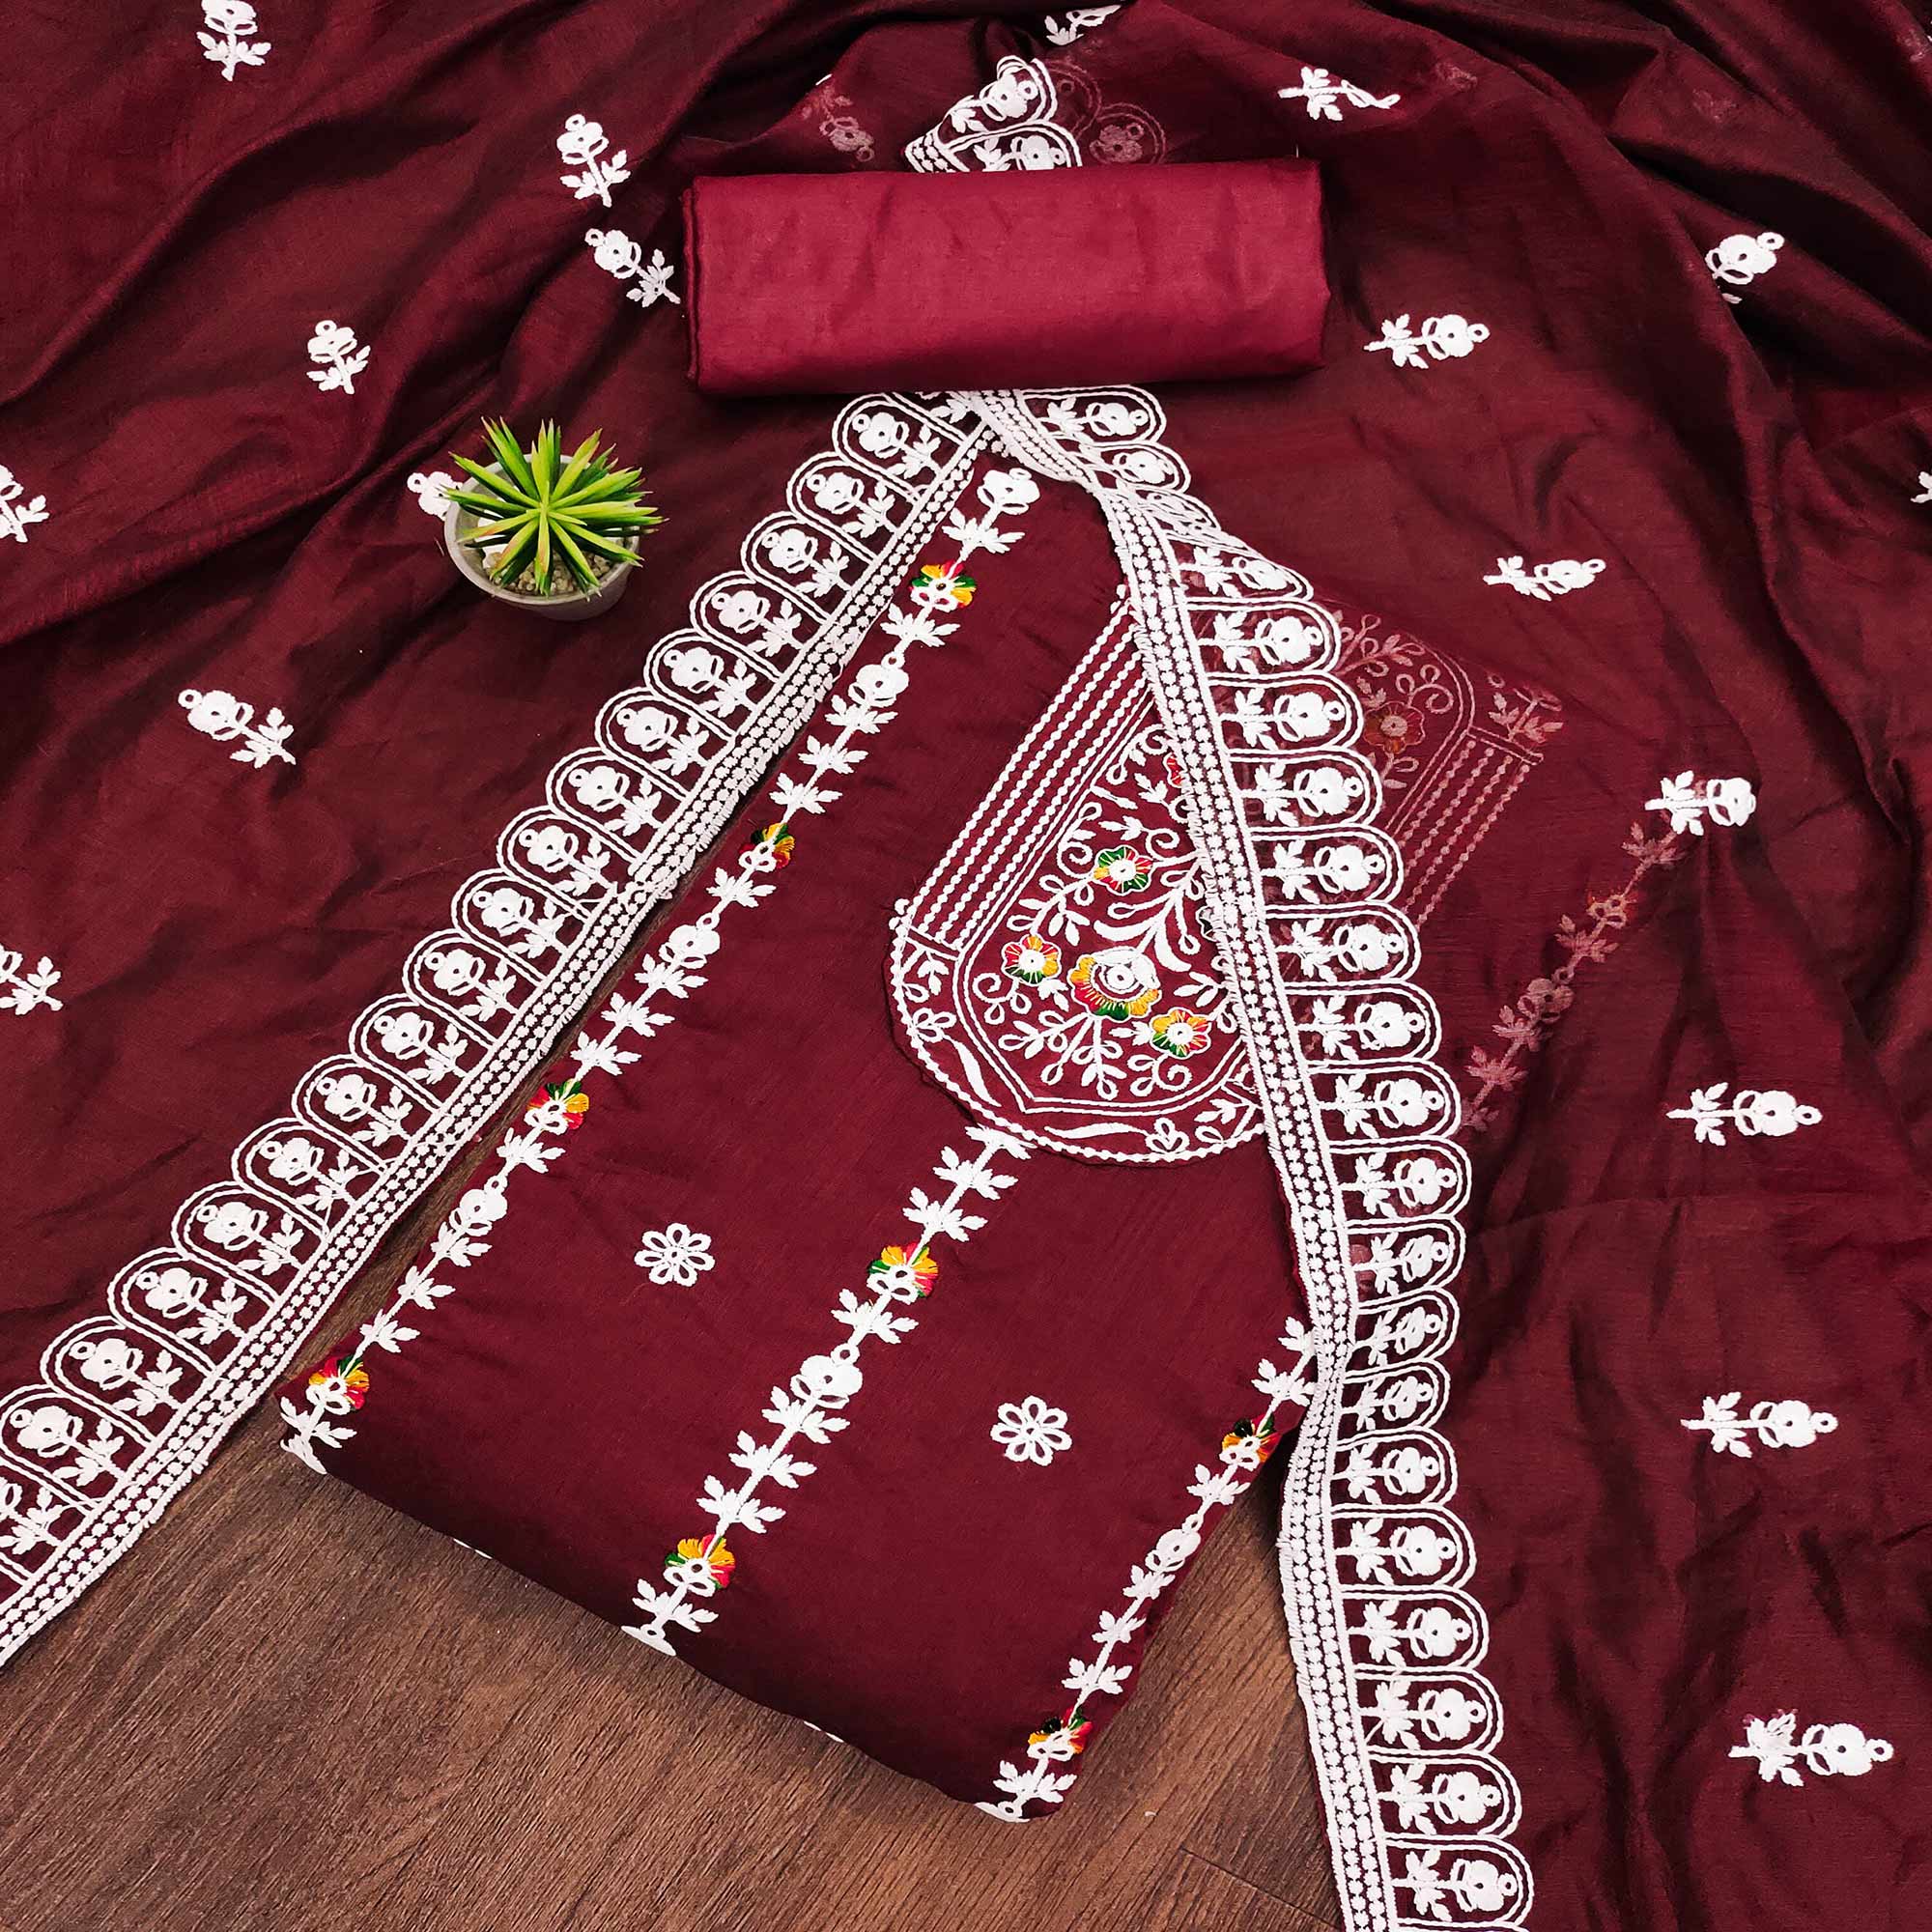 Maroon Floral Embroidered Chanderi Cotton Dress Material